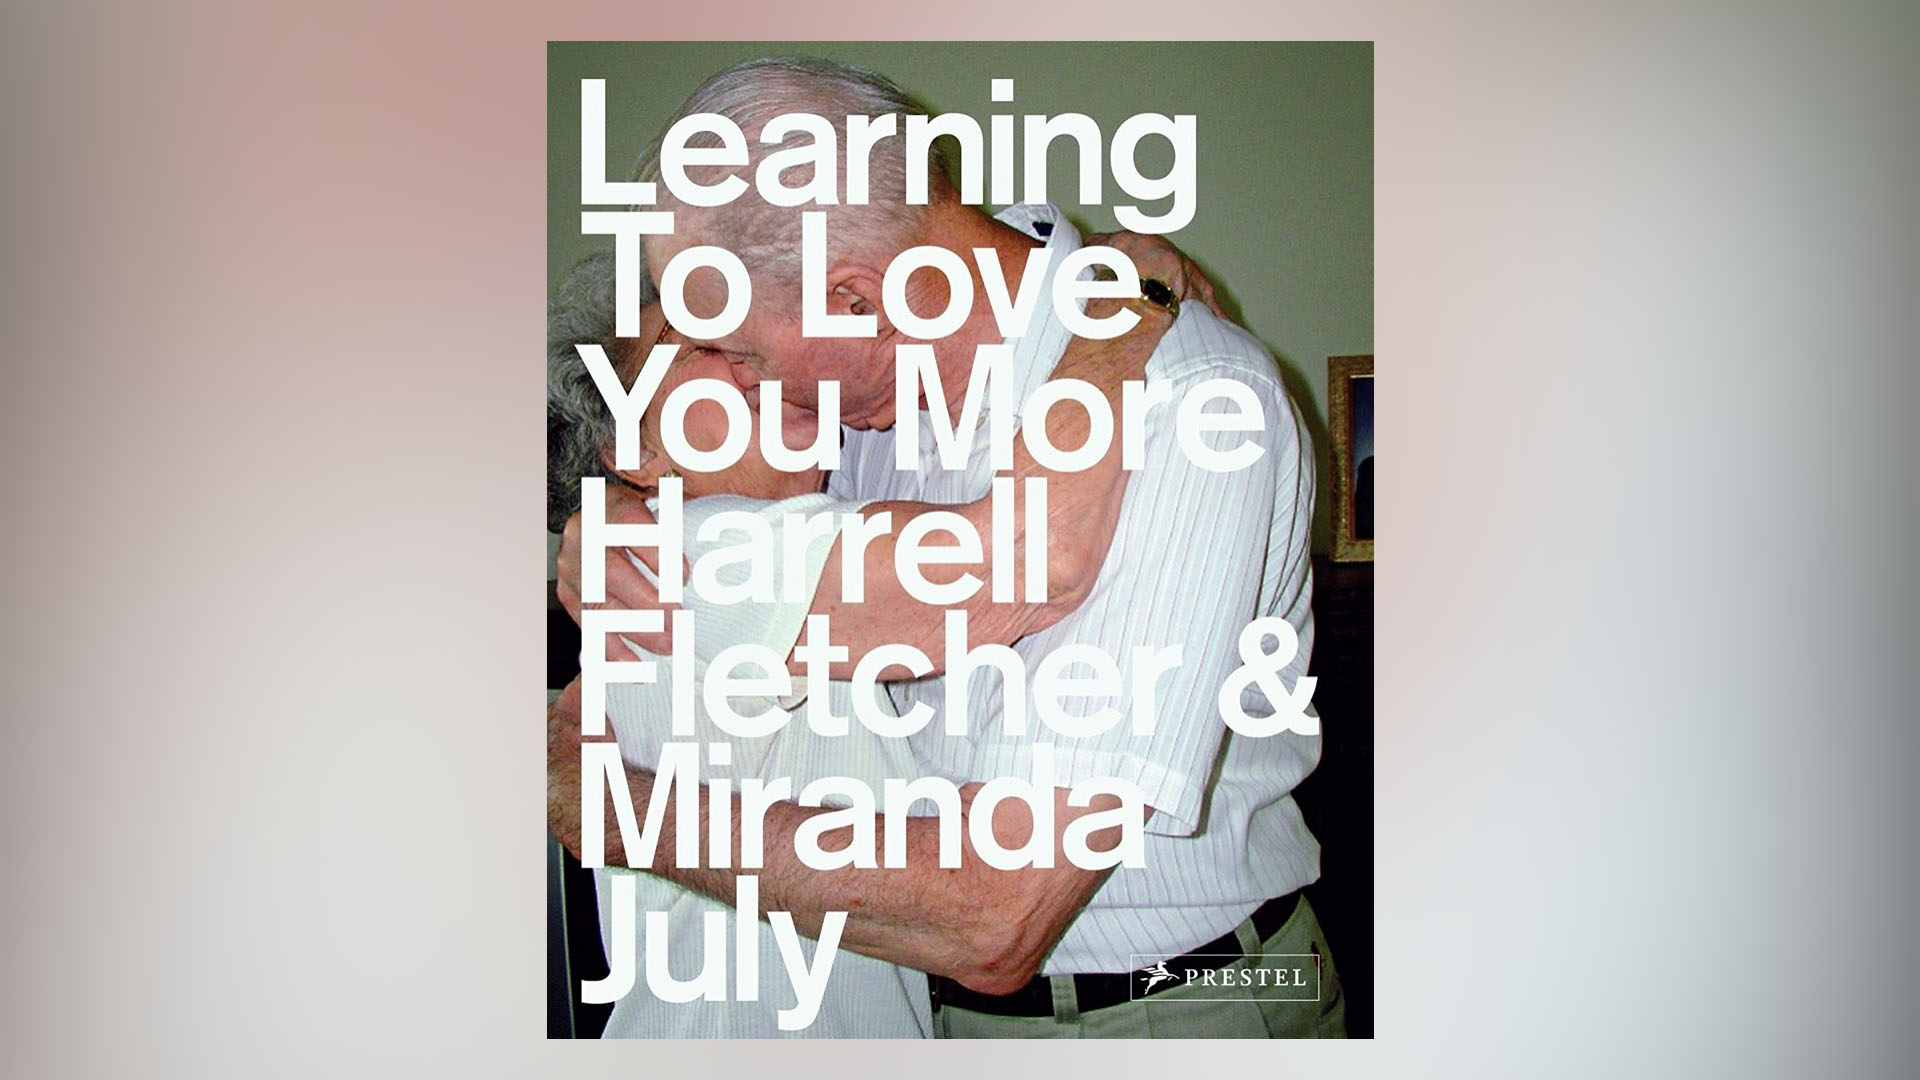 Photograph of an elderly couple embracing with white text "LEARNING TO LOVE YOU MORE Harrell Fletcher and Miranda July" overlayed 